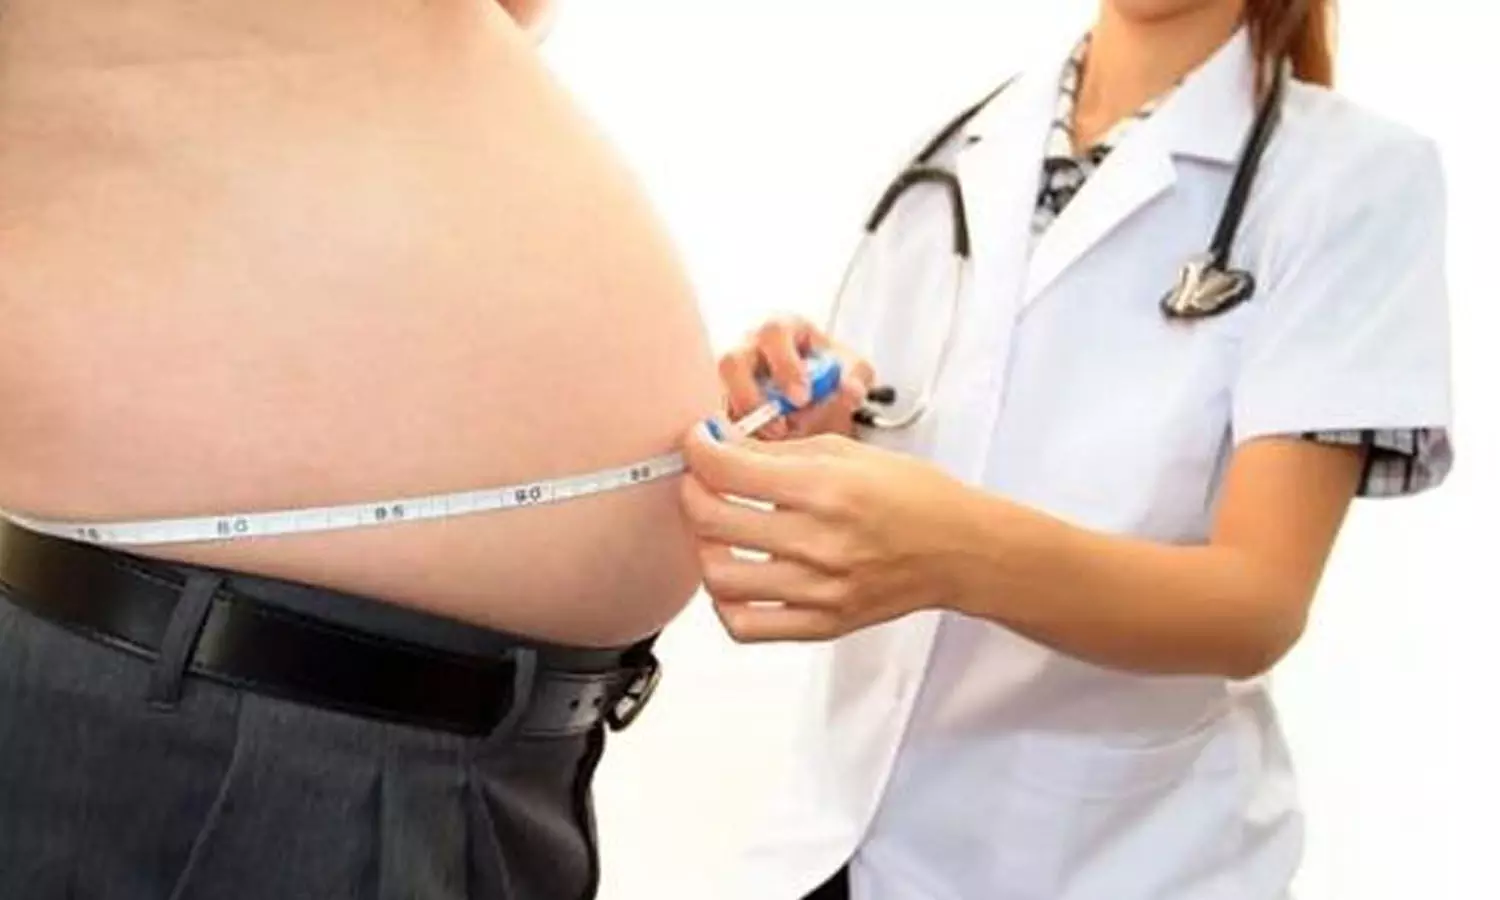 Obesity can lead to cancer, say doctors